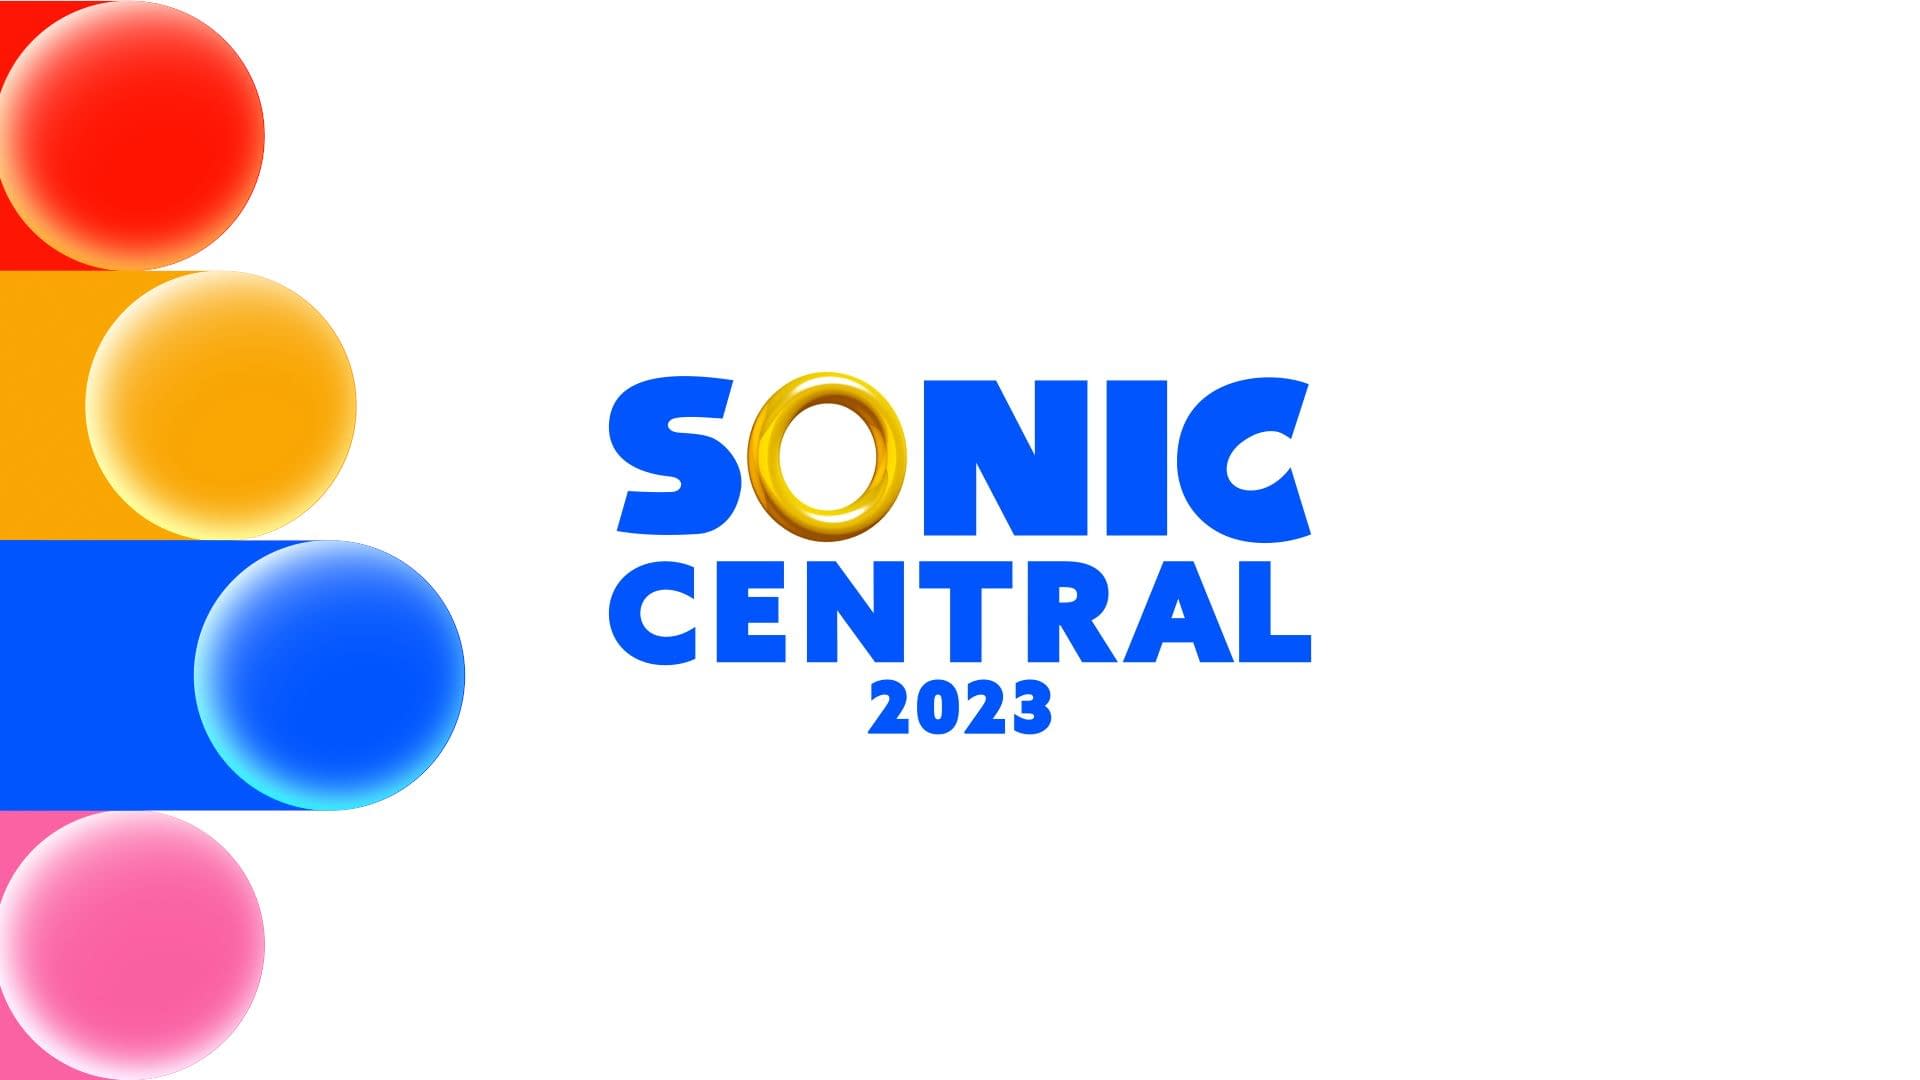 Sonic Frontiers 2023 Roadmap - modes, Koco, playable characters